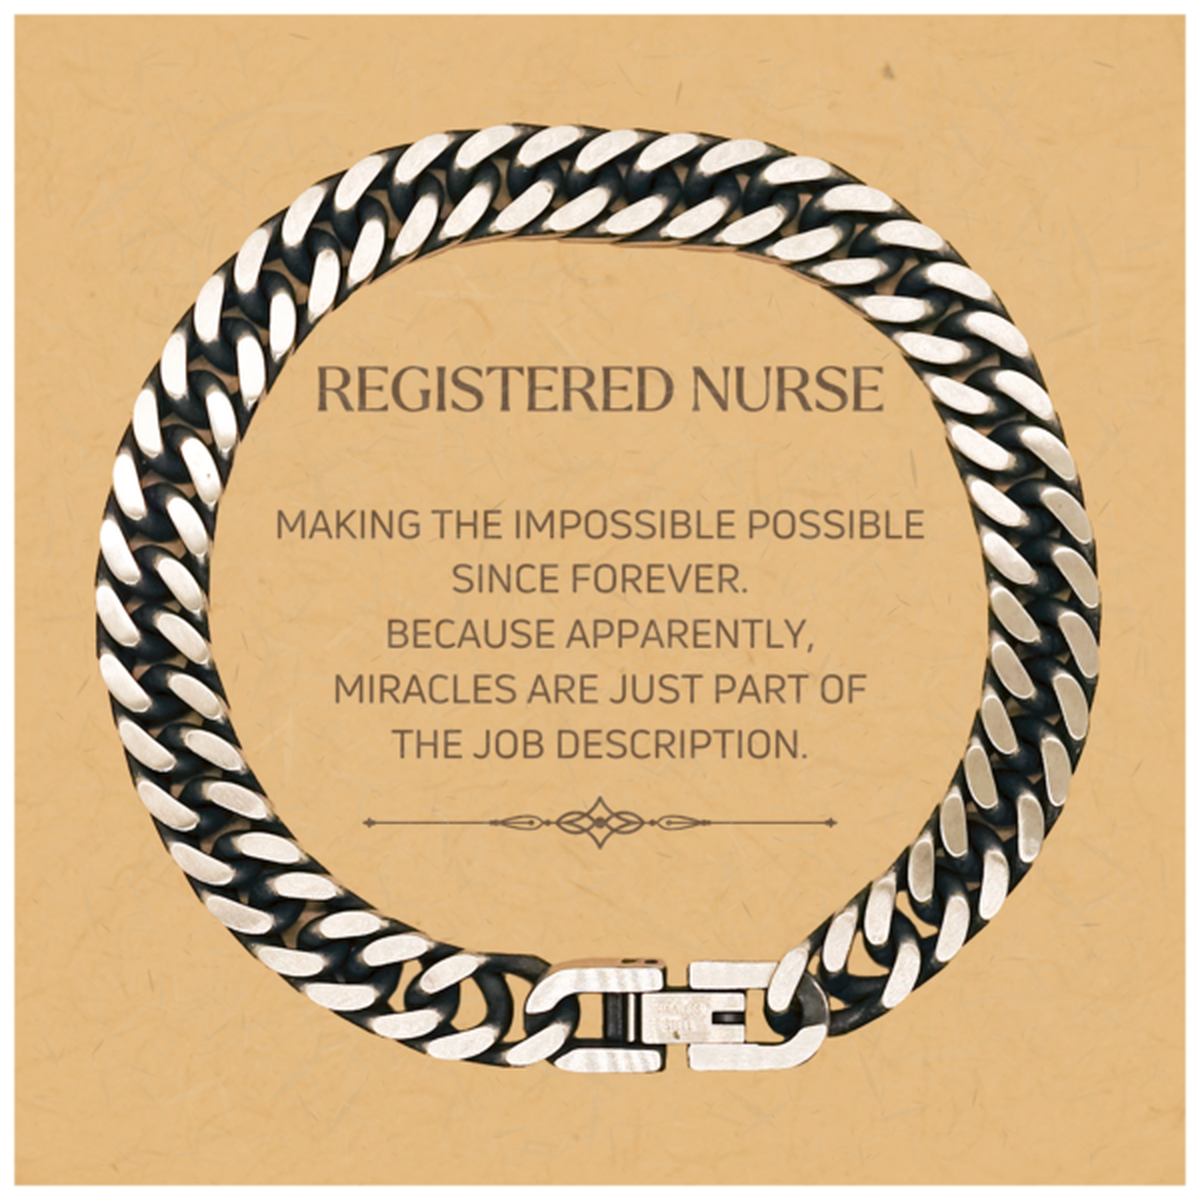 Funny Registered Nurse Gifts, Miracles are just part of the job description, Inspirational Birthday Christmas Cuban Link Chain Bracelet For Registered Nurse, Men, Women, Coworkers, Friends, Boss